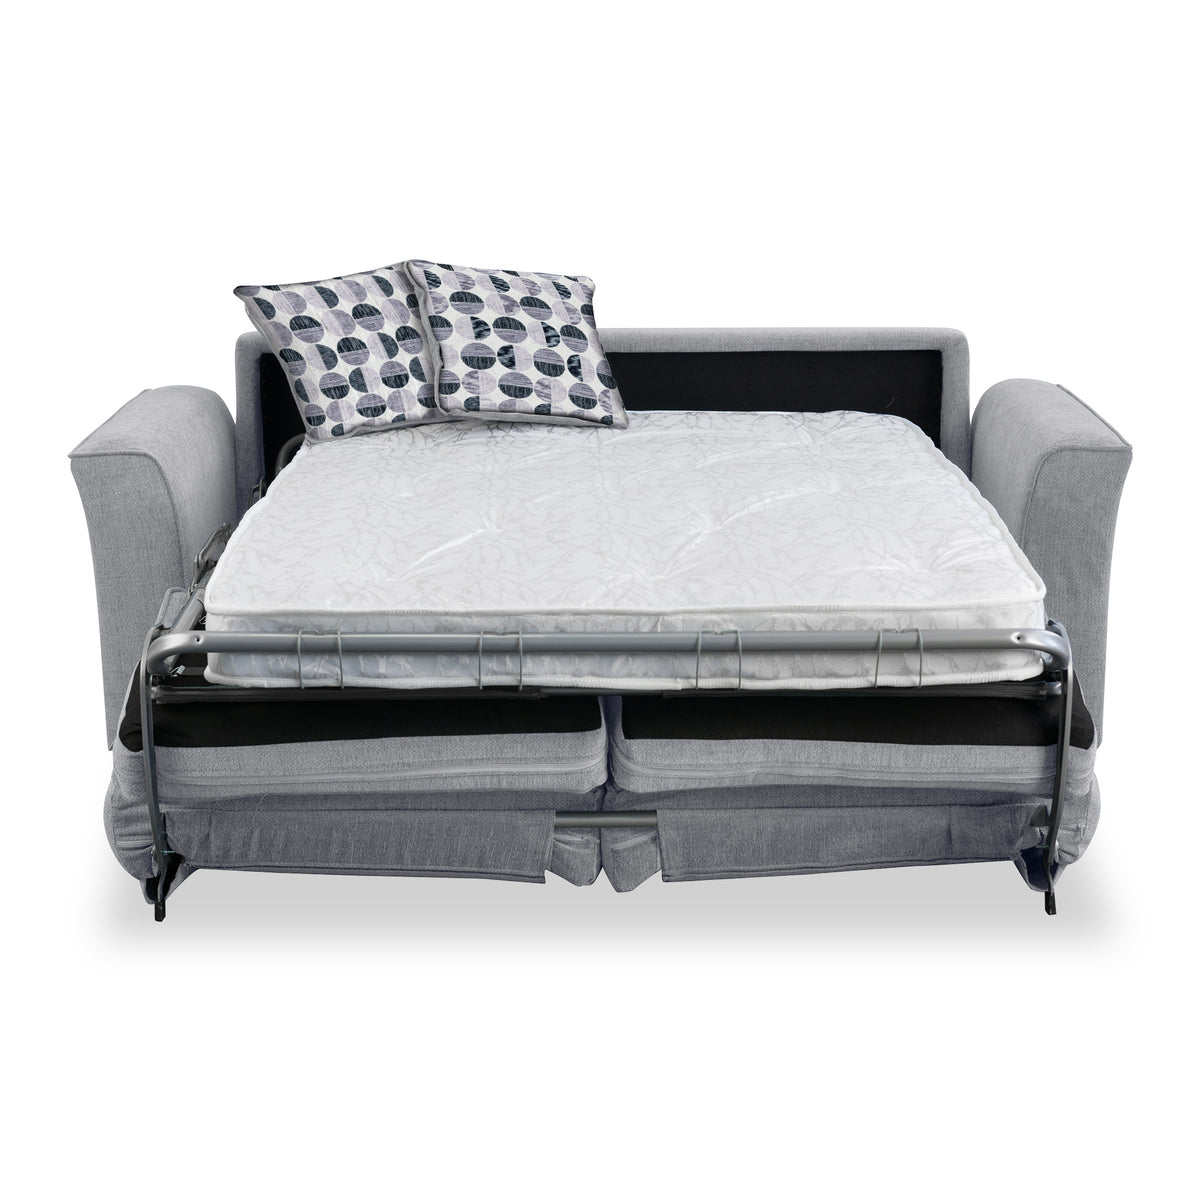 Abbott 2 Seater Sofabed in Silver with Rufus Mono Cushions by Roseland Furniture